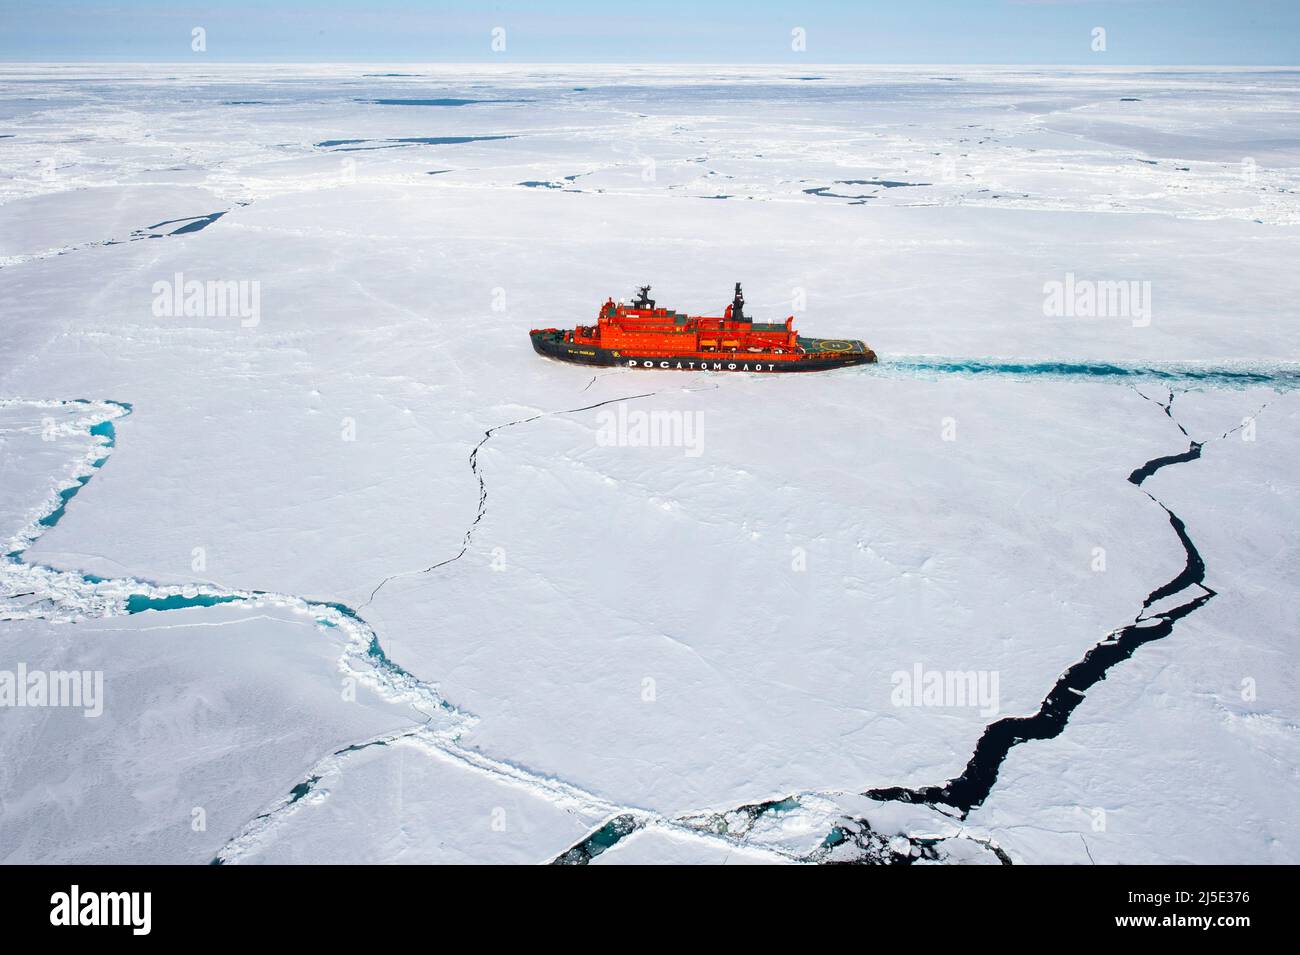 Nuclear Icebreaker breaking the ice in arctic waters Stock Photo